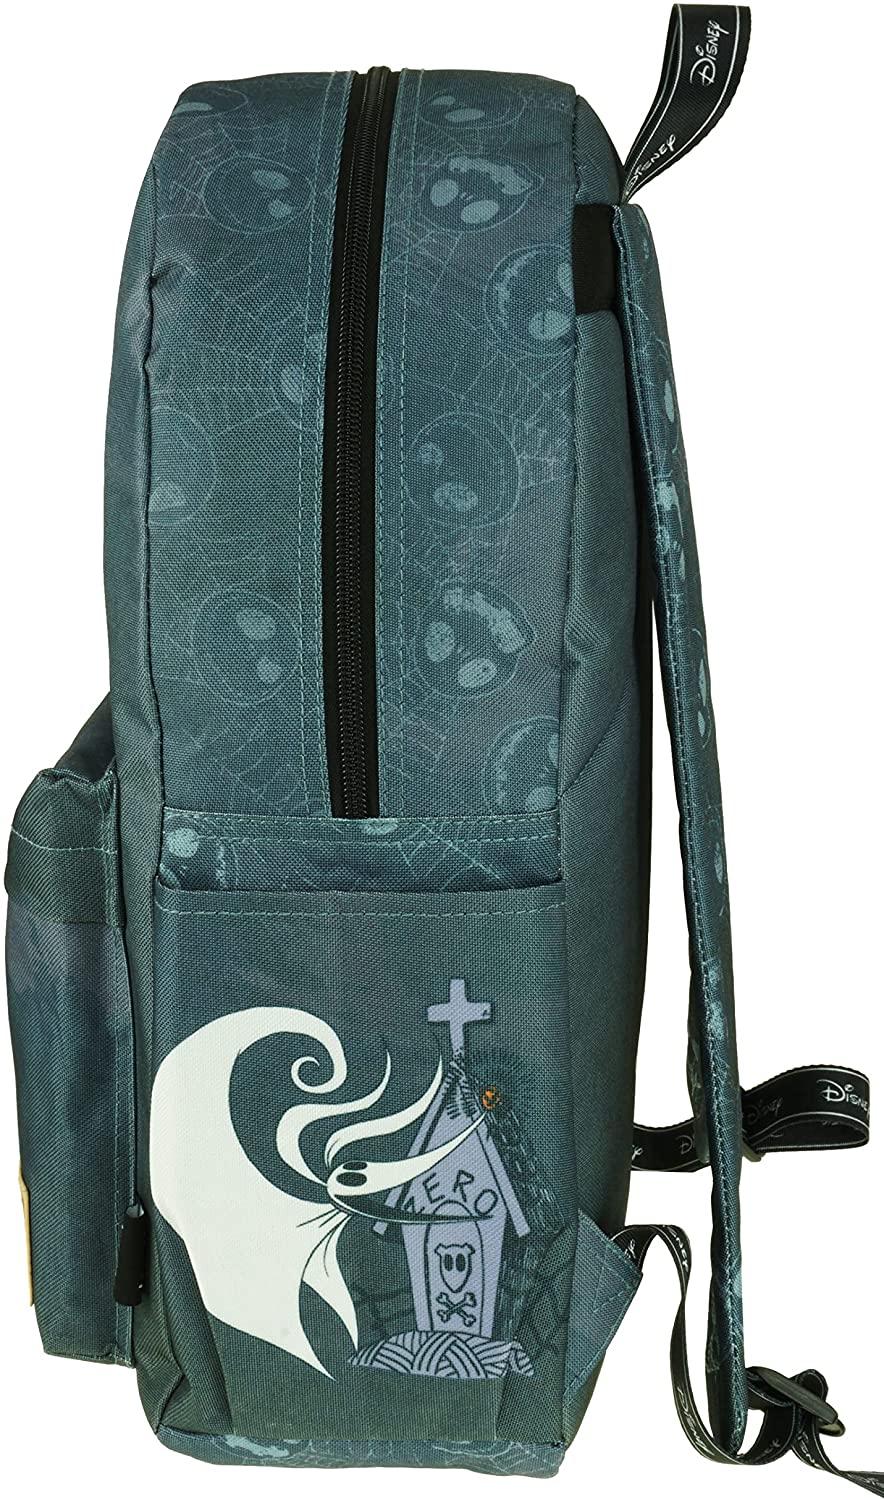 Classic Disney Nightmare Before Christmas Backpack with Laptop Compartment for School - Color - GTE Zone